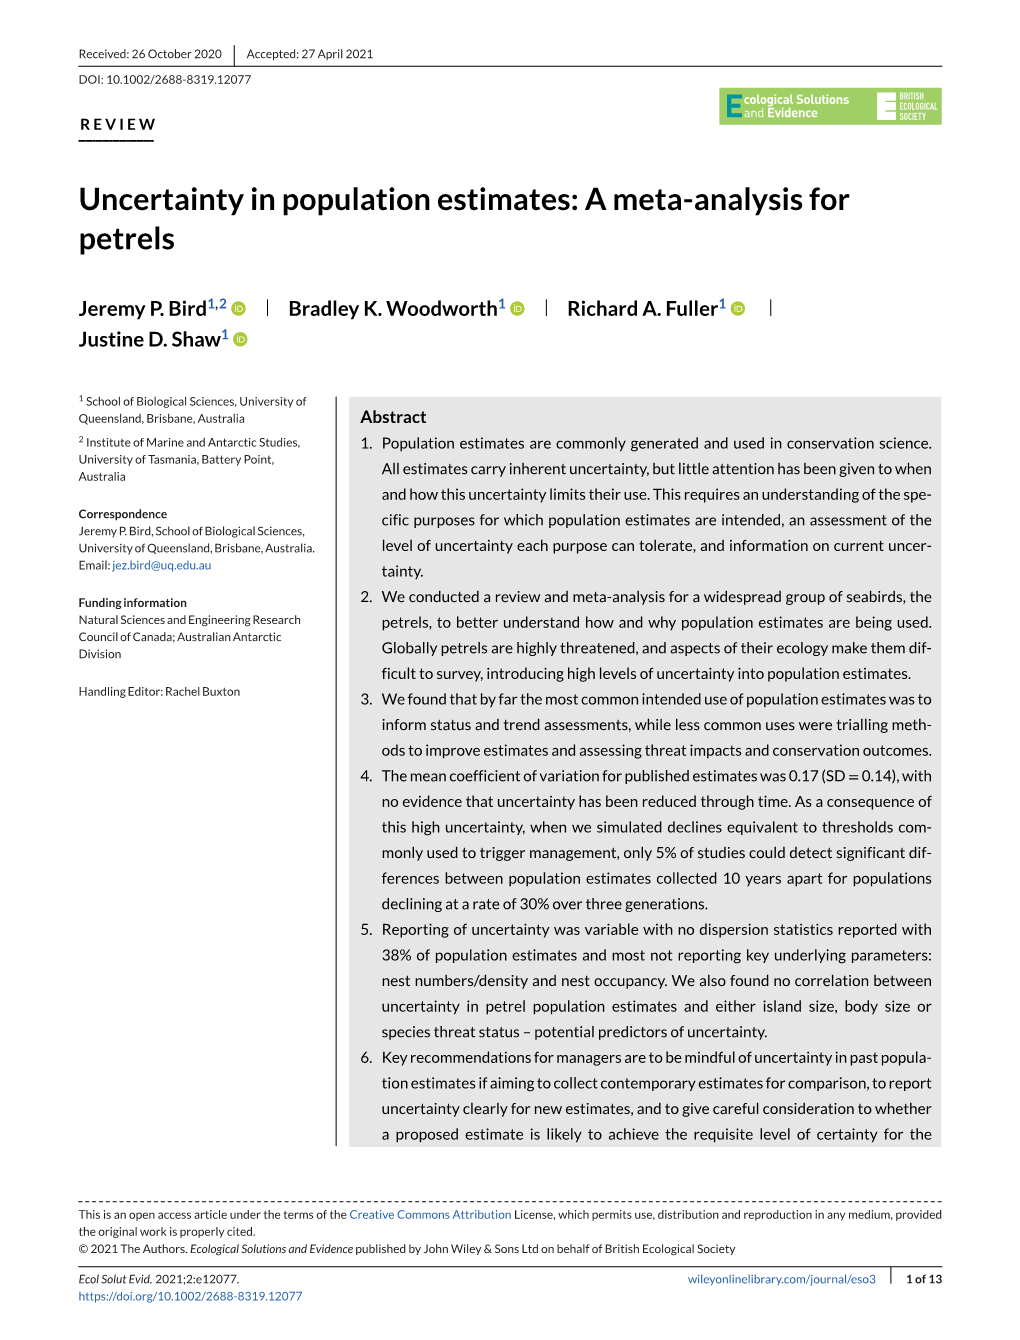 Uncertainty in Population Estimates: a Meta-Analysis for Petrels